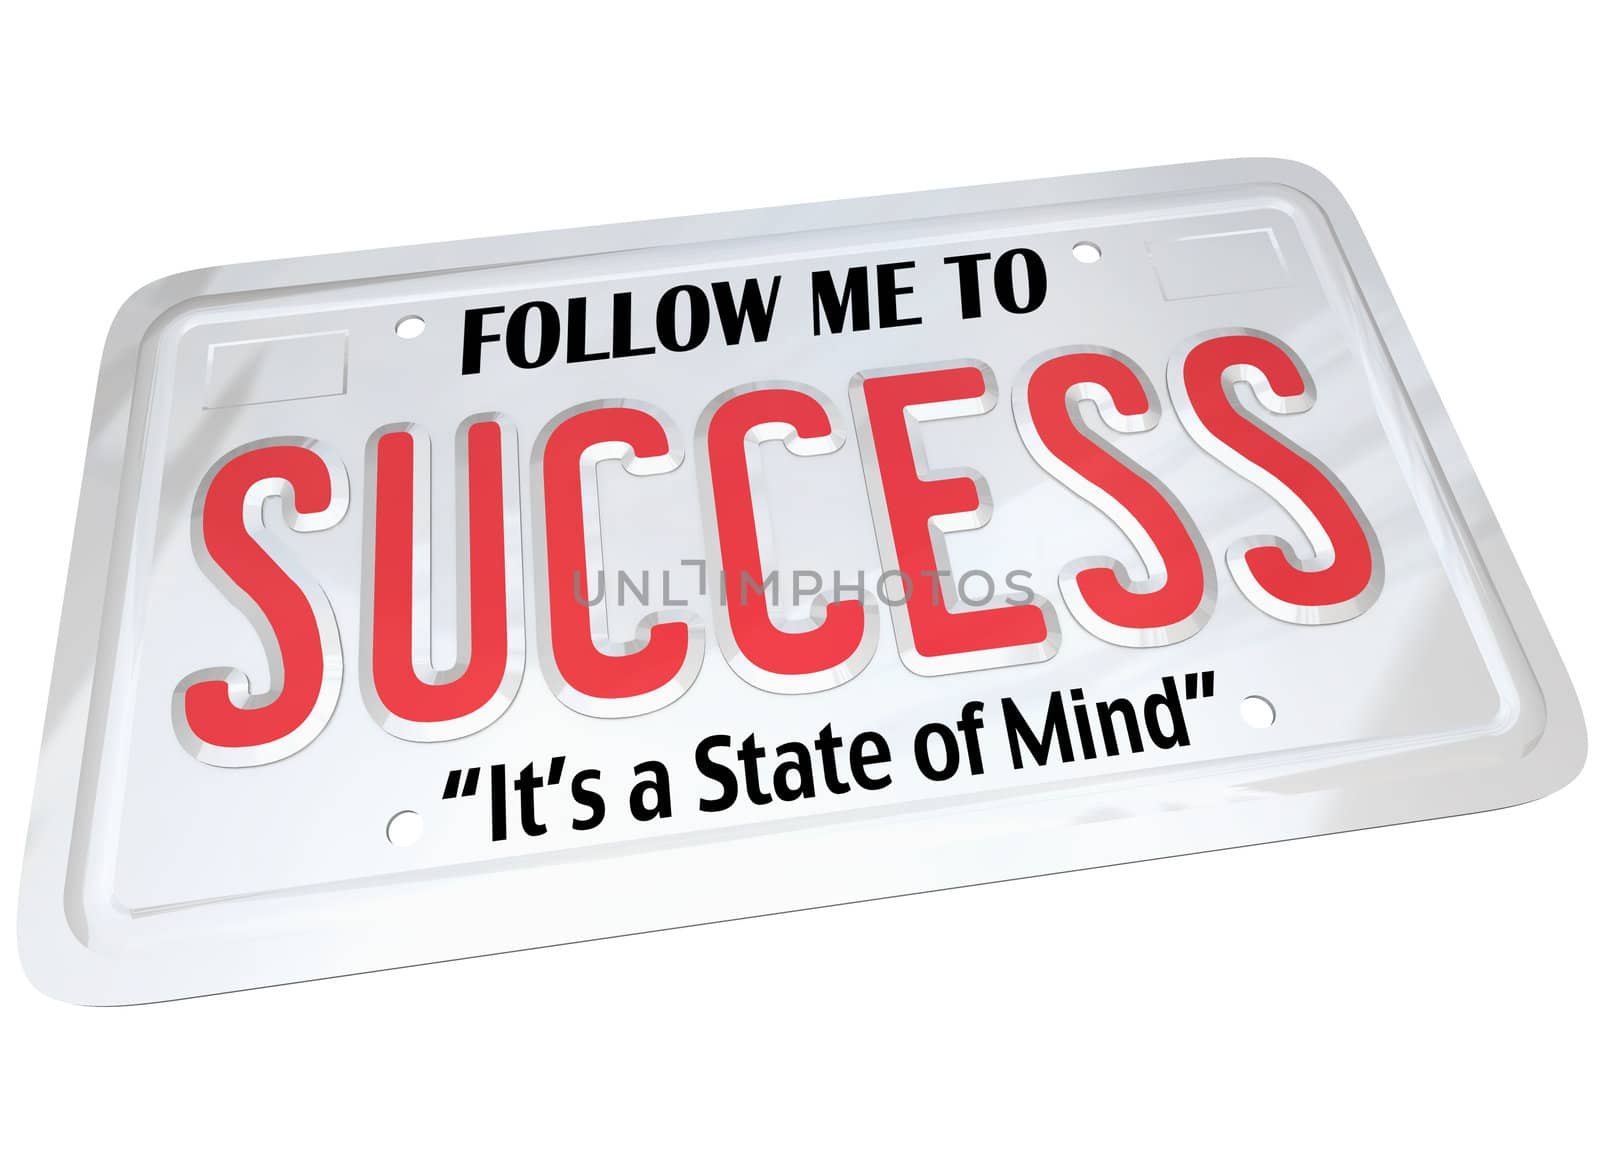 Success Word on License Plate Follow to Successful Future by iQoncept